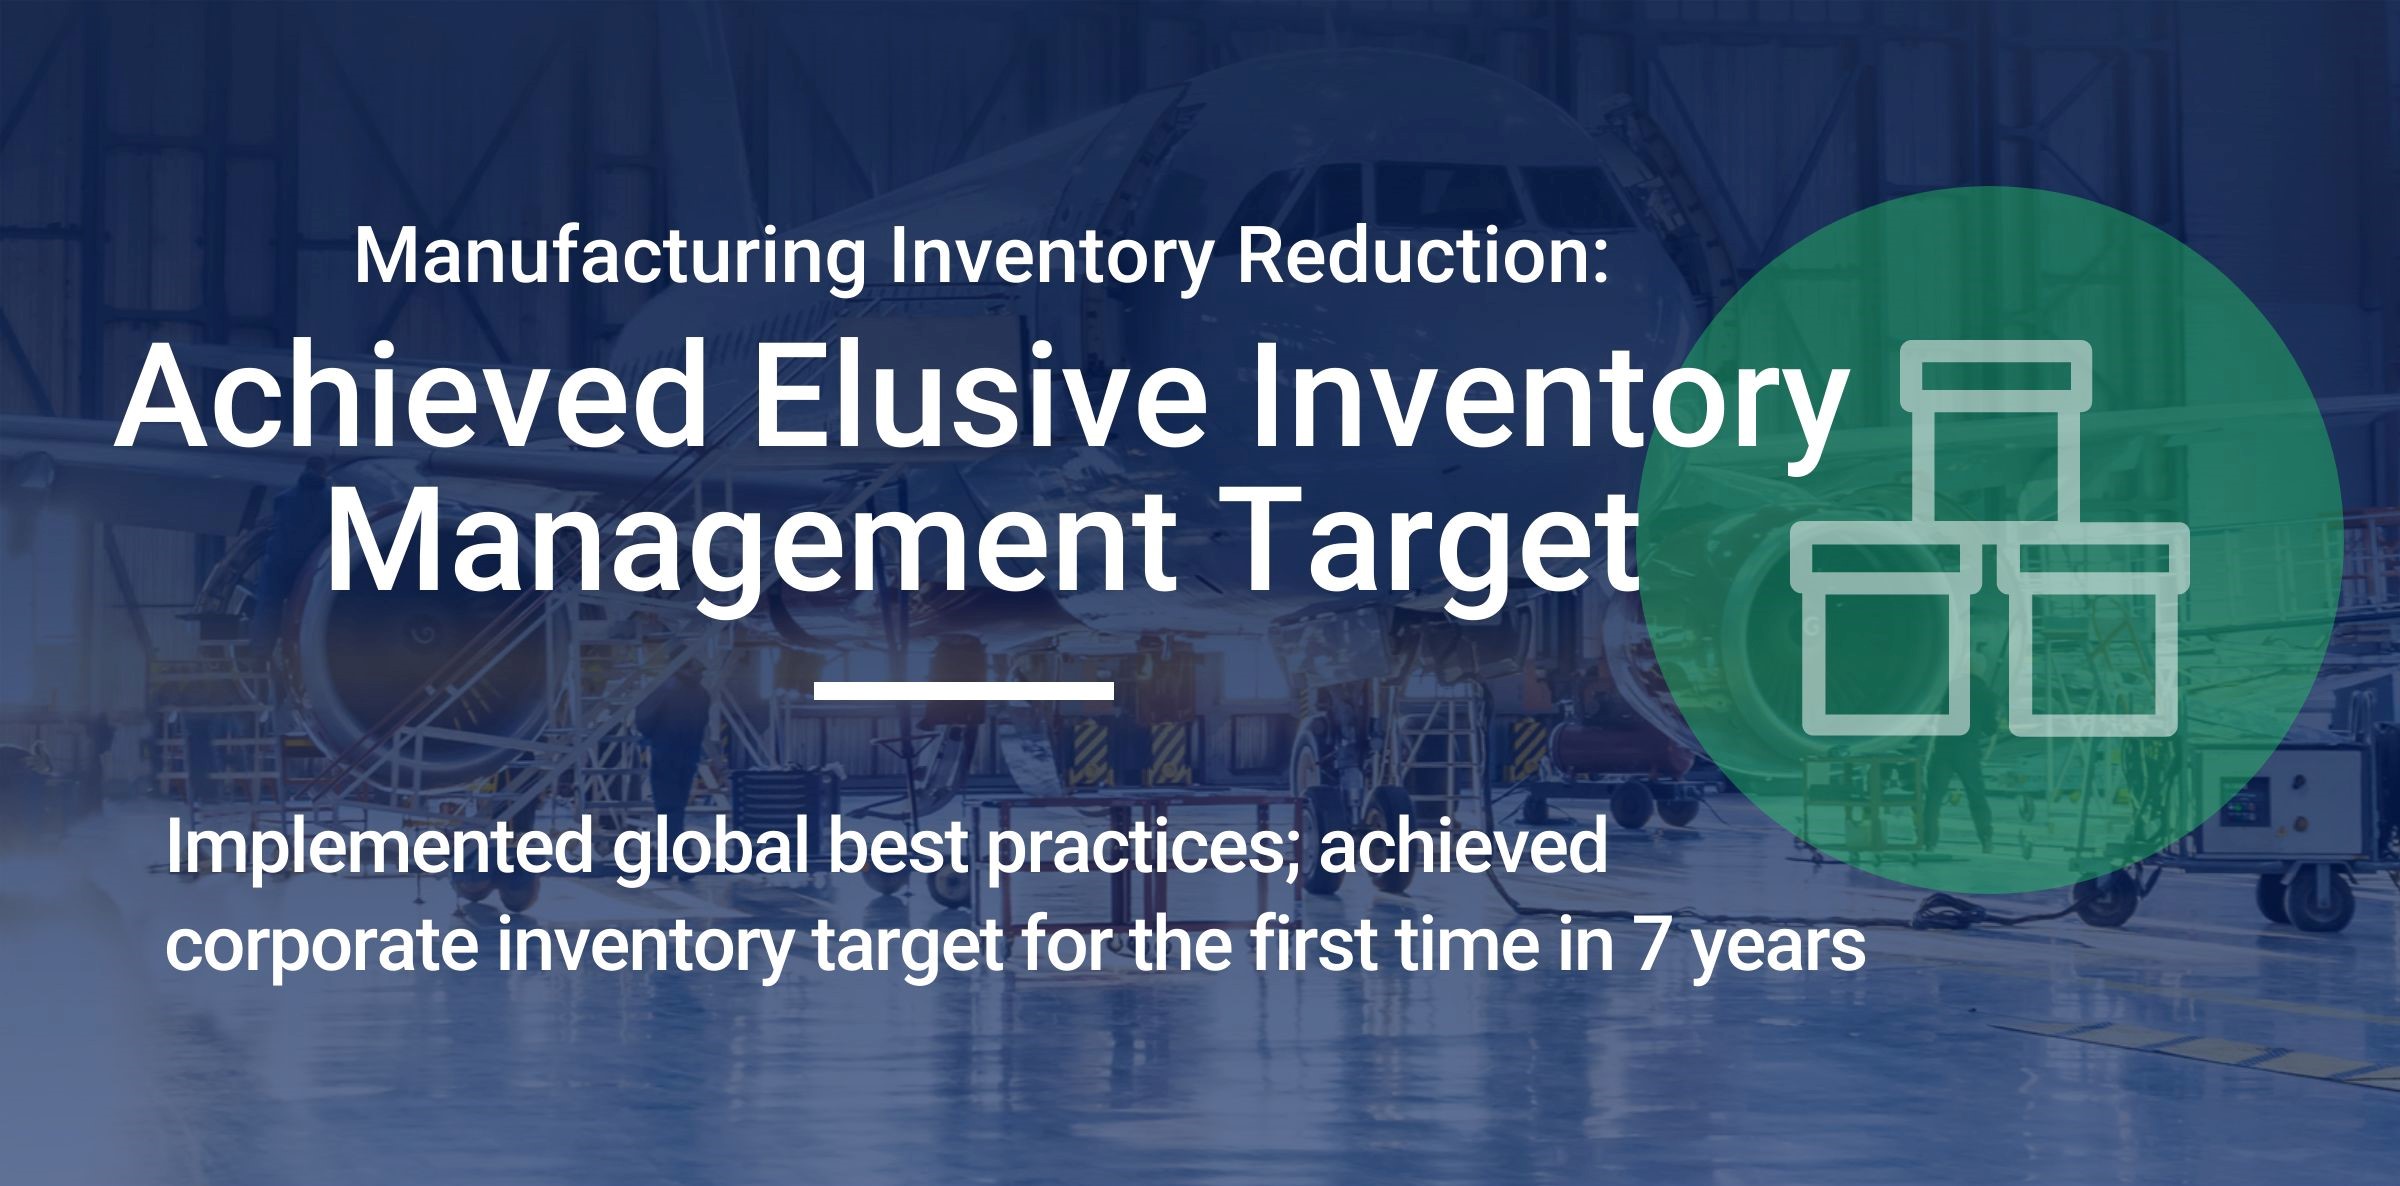 Manufacturing Inventory Reduction